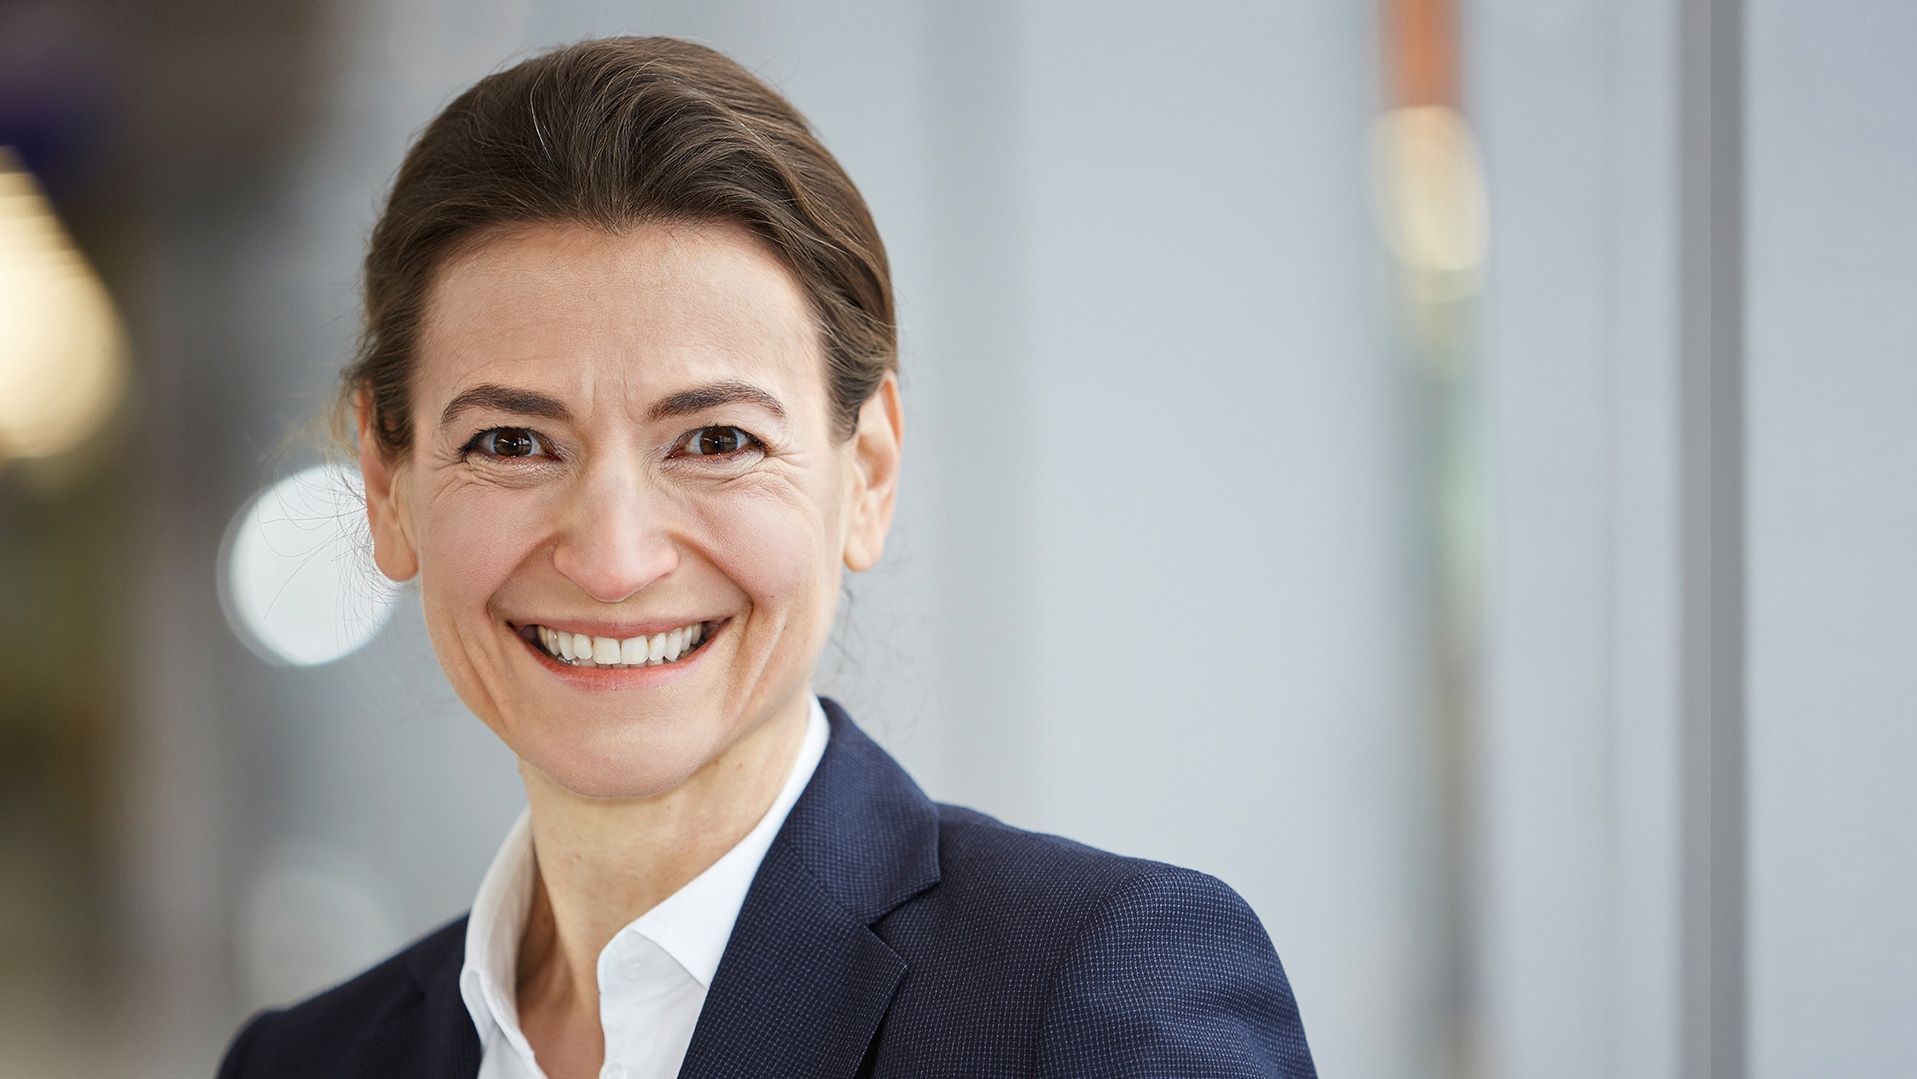 Effective 1 September 2021, Susan-Stefanie Breitkopf will become Head of Corporate Human Resources for the ZEISS Group.